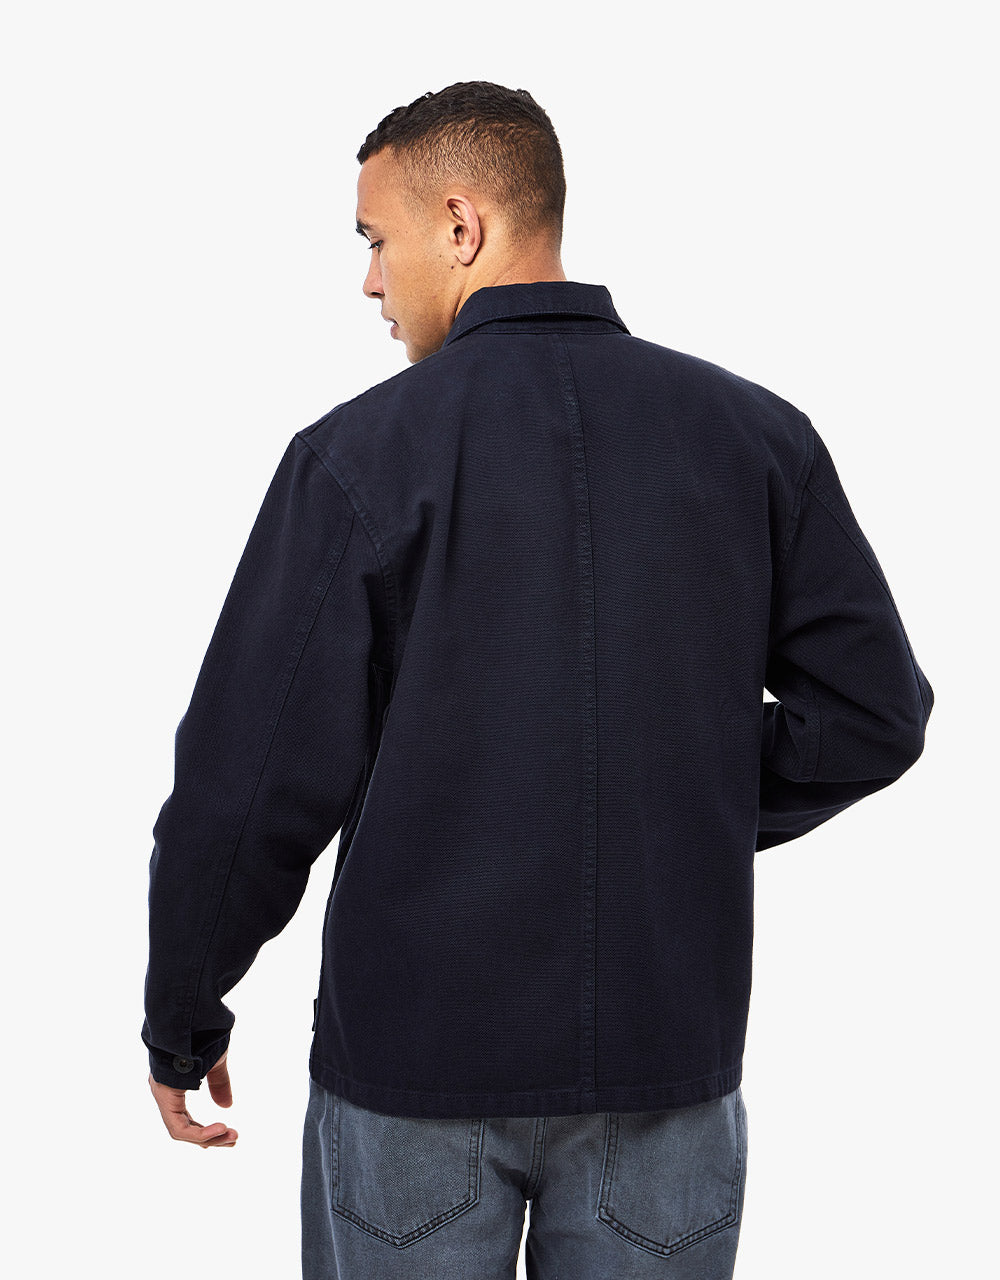 Route One Classic Chore Jacket - Navy